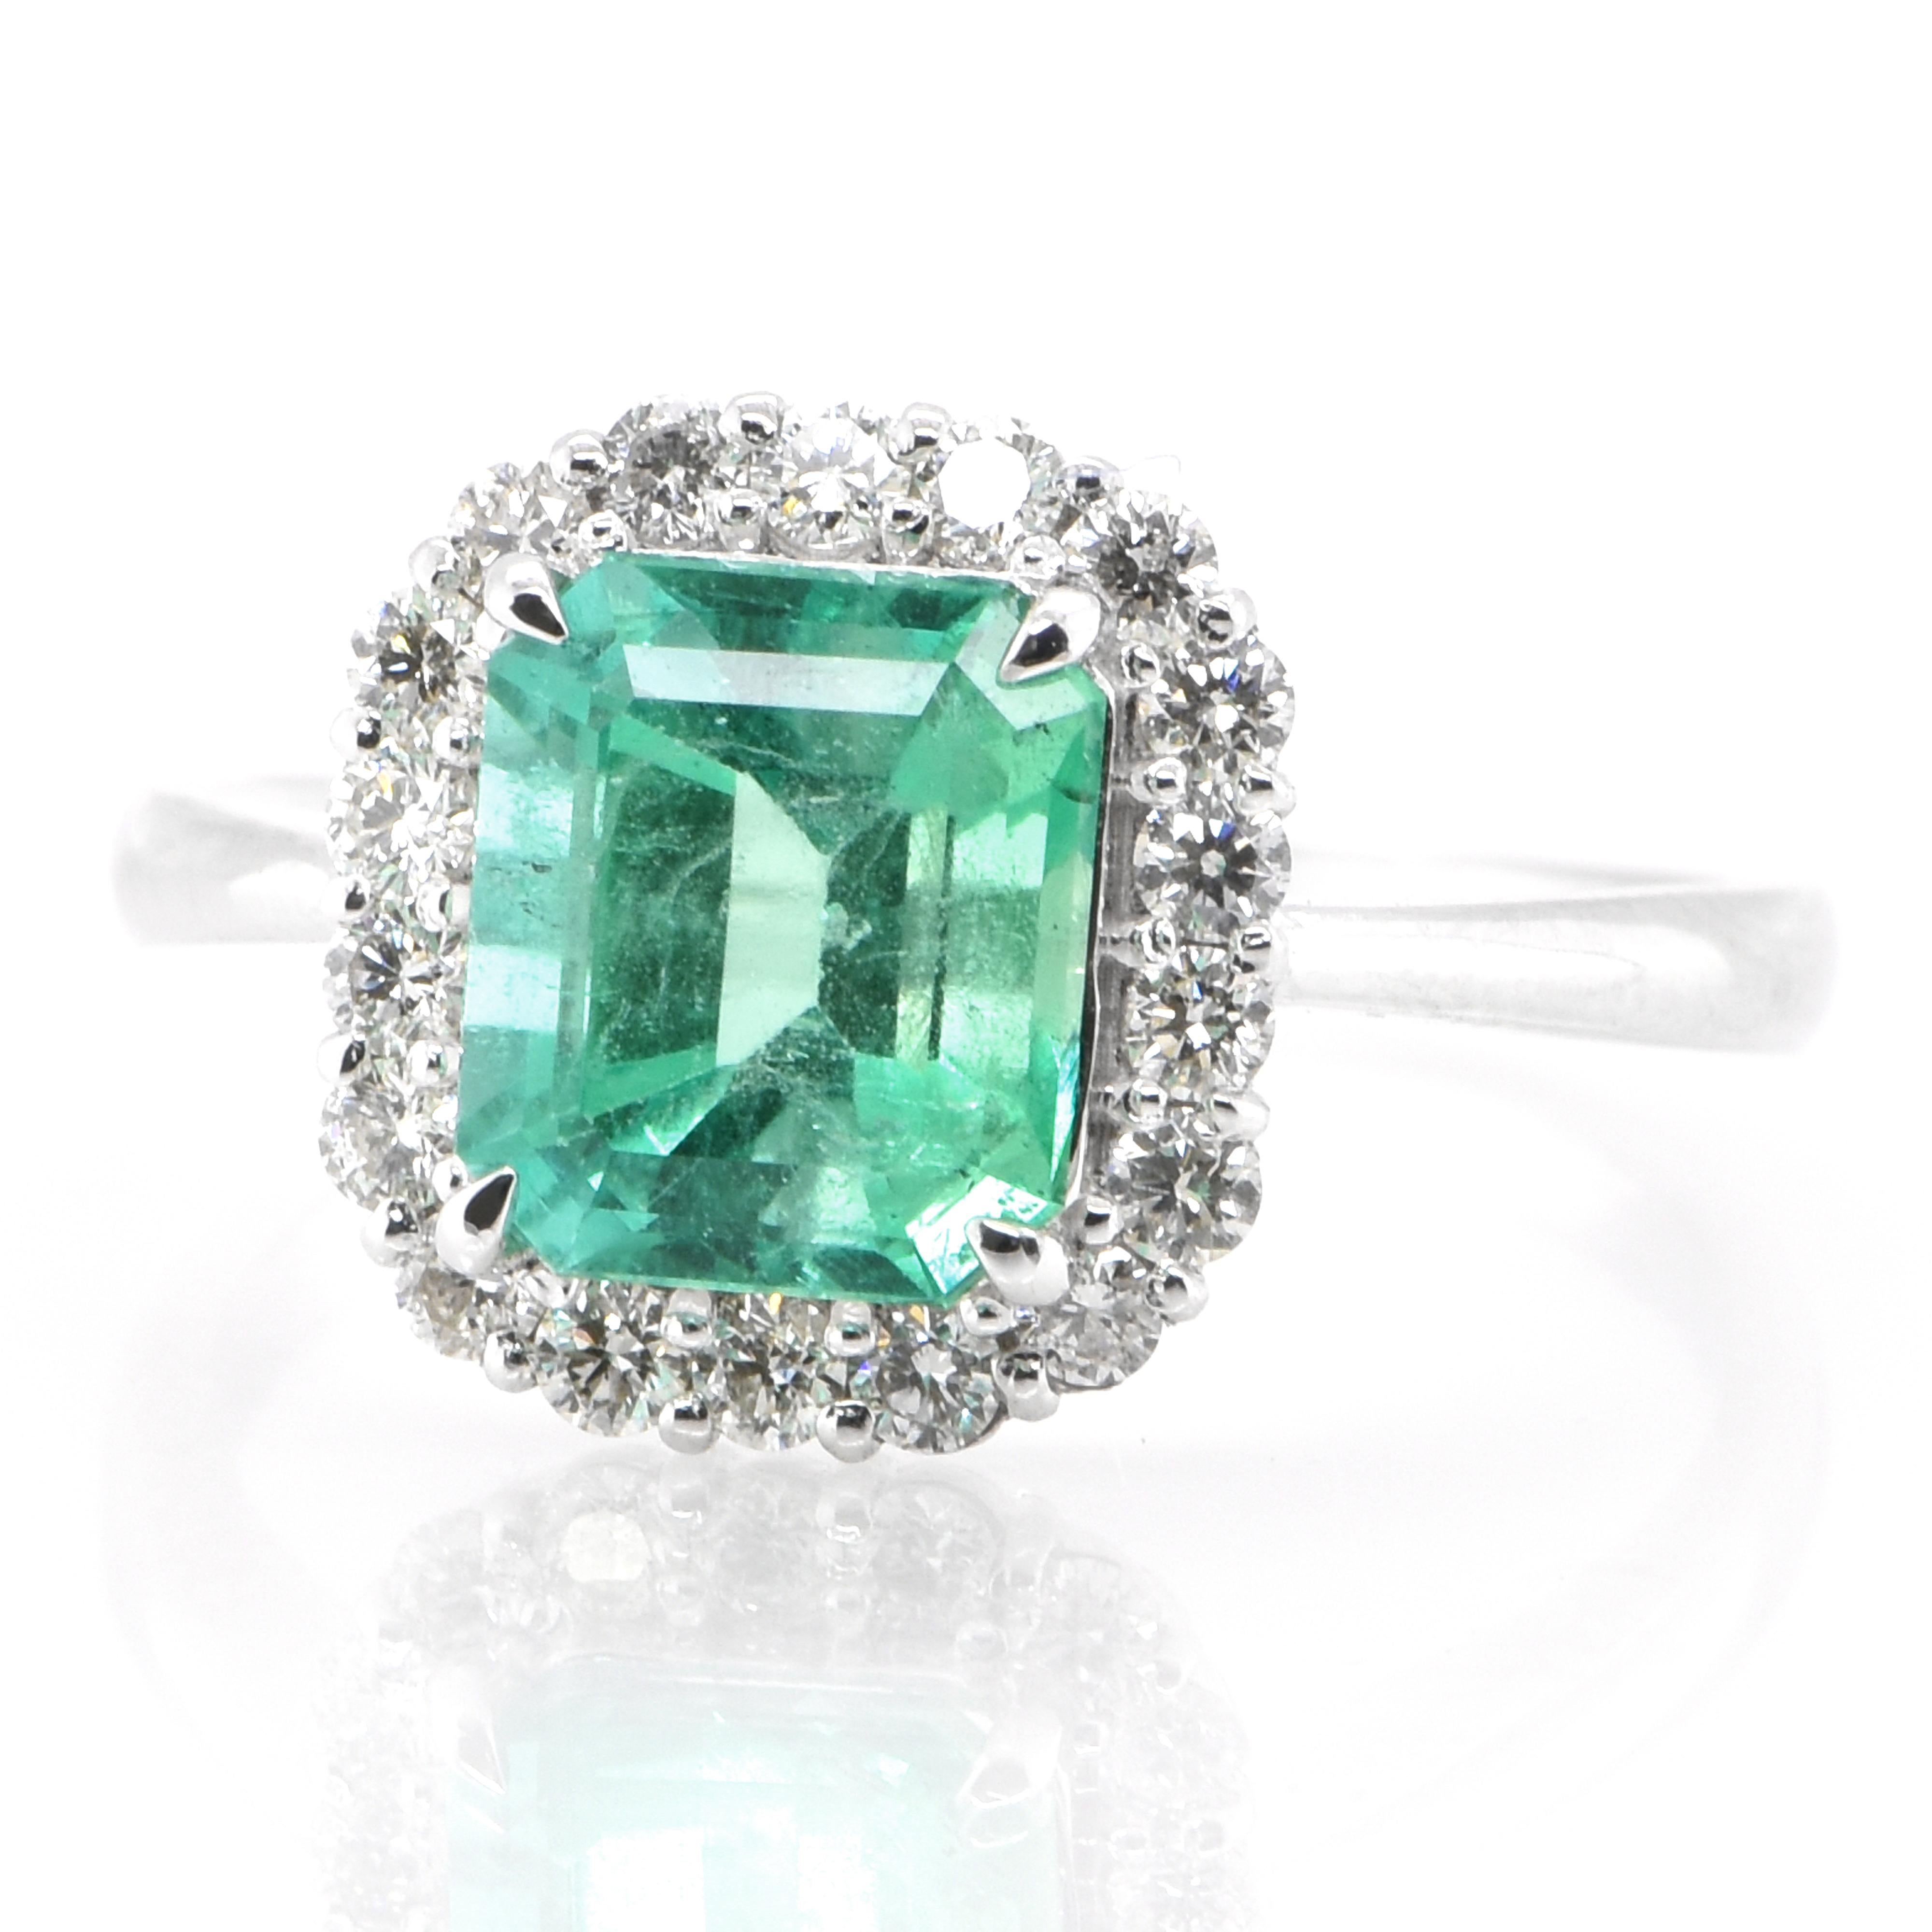 A stunning ring featuring a 1.93 Carat Natural Emerald and 0.36 Carats of Diamond Accents set in Platinum. People have admired emerald’s green for thousands of years. Emeralds have always been associated with the lushest landscapes and the richest